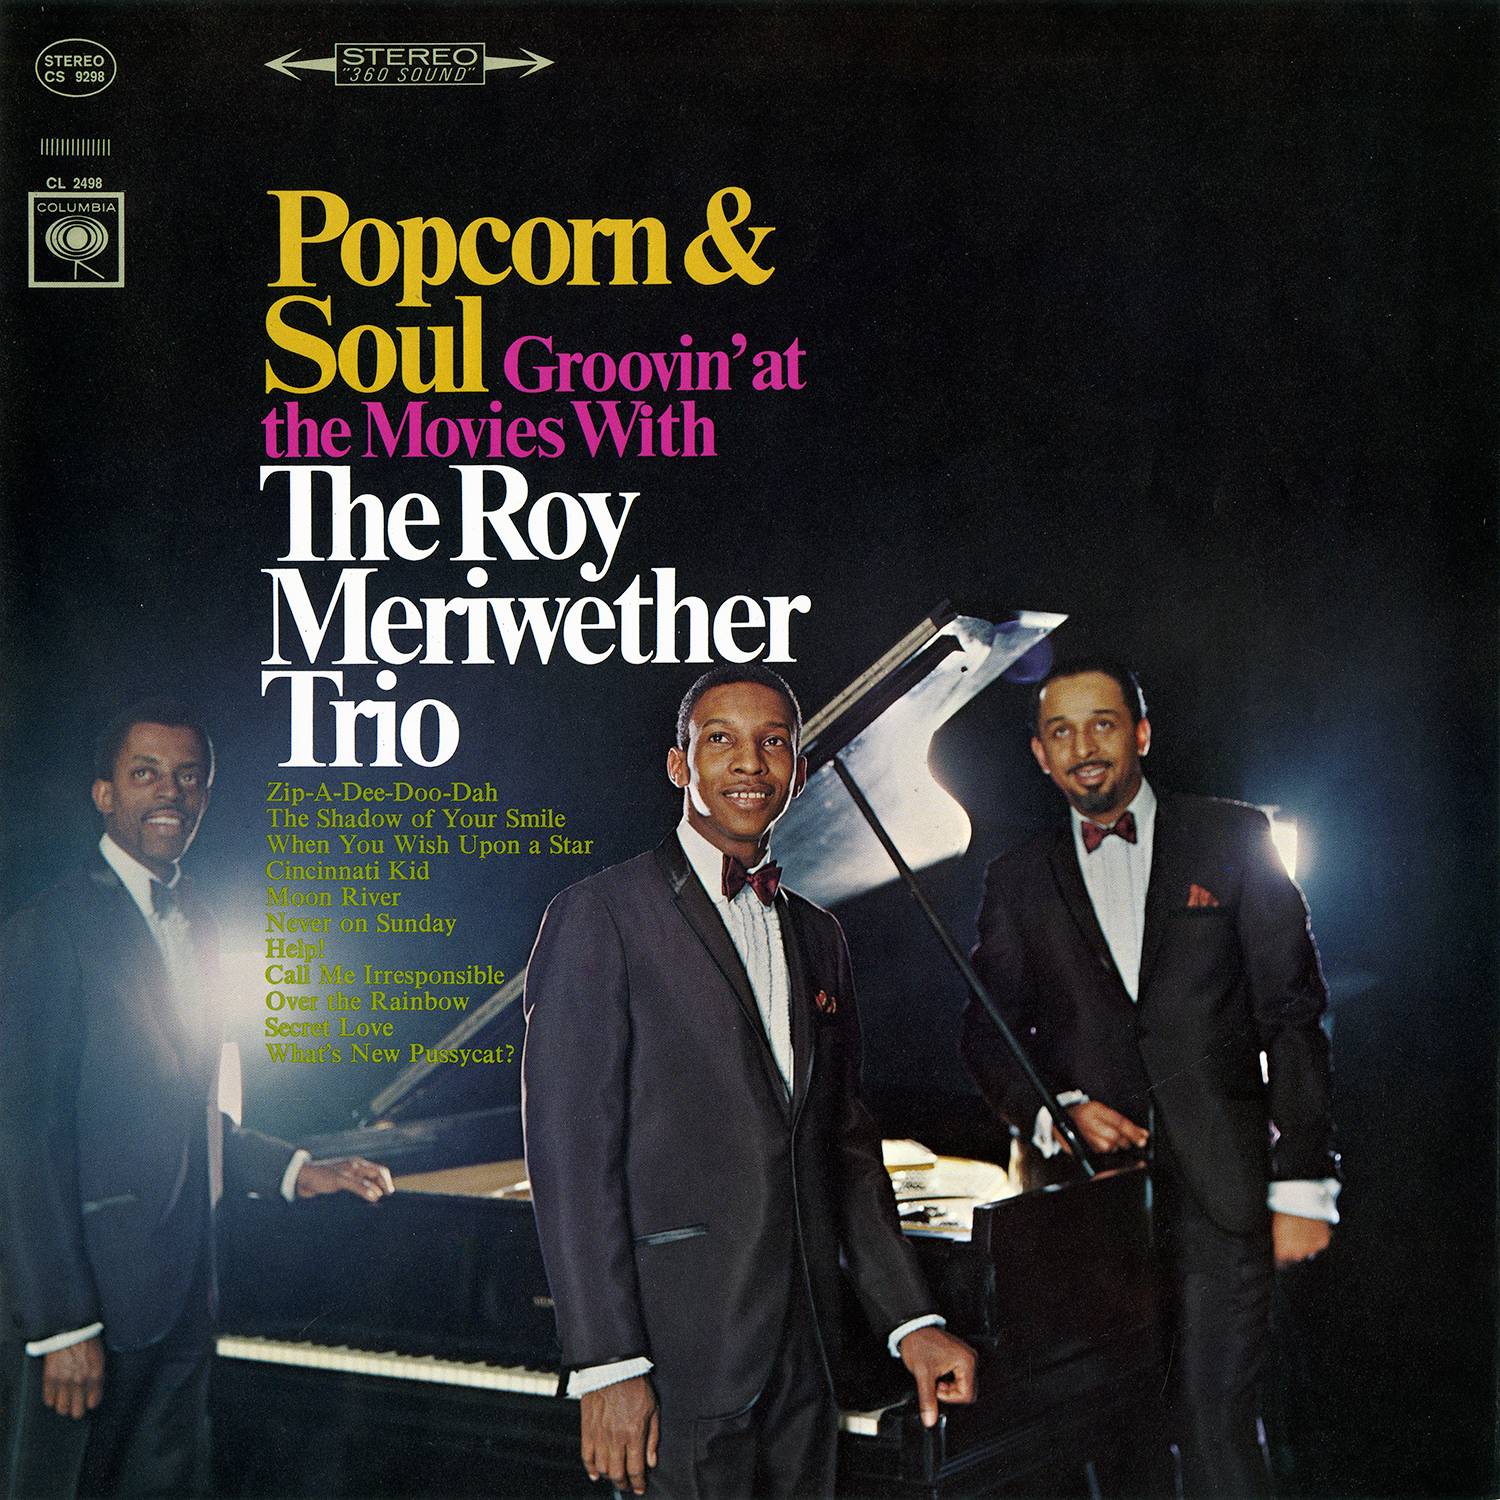 Roy Meriwether Trio - Popcorn And Soul: Groovin At The Movies (1966/2016) [AcousticSounds FLAC 24bit/192kHz]